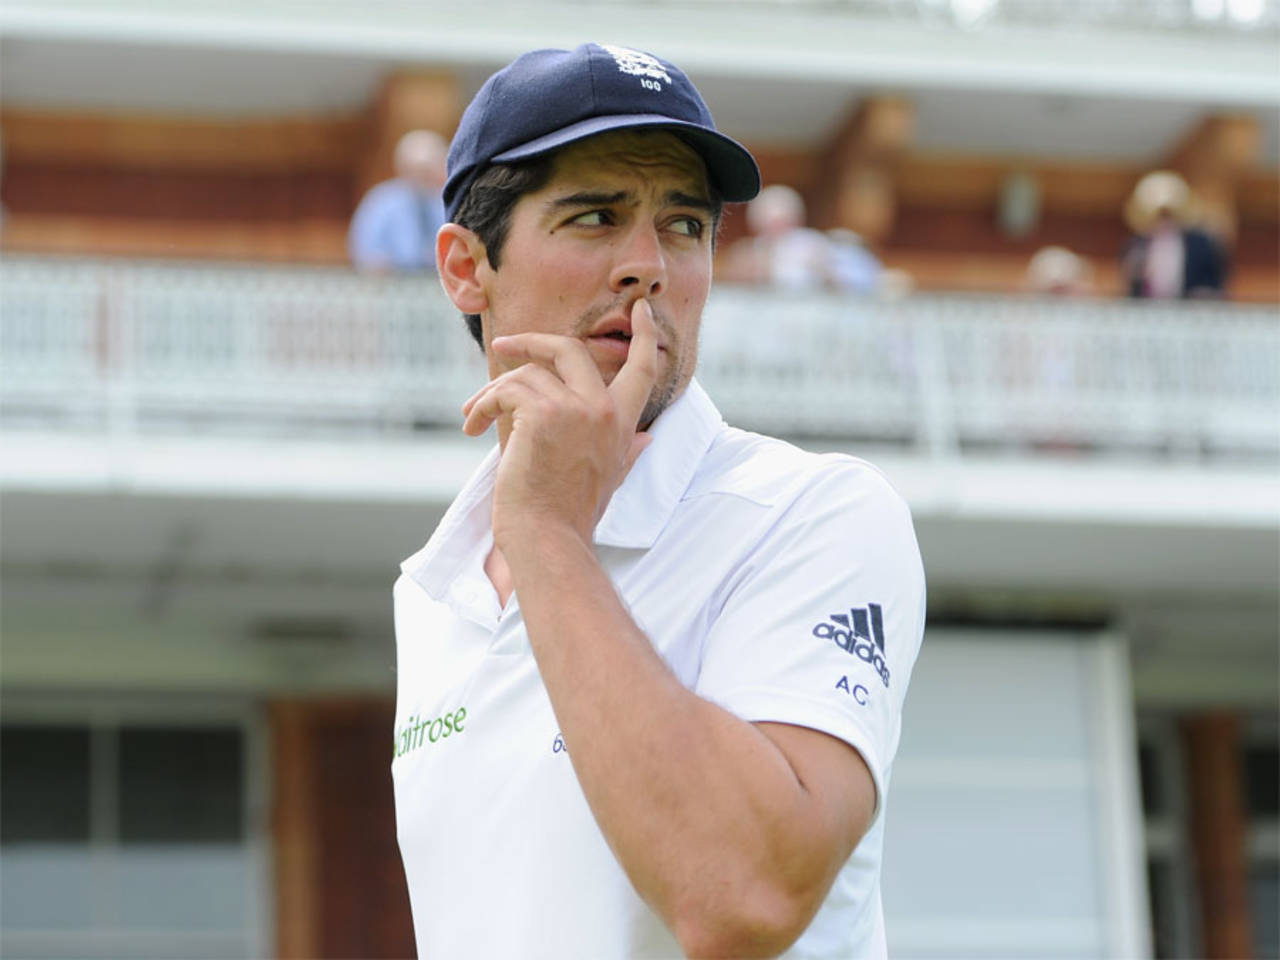 How did it come to this? Alastair Cook reflects on England's loss, England v India, 2nd Investec Test, Lord's, 5th day, July 21, 2014